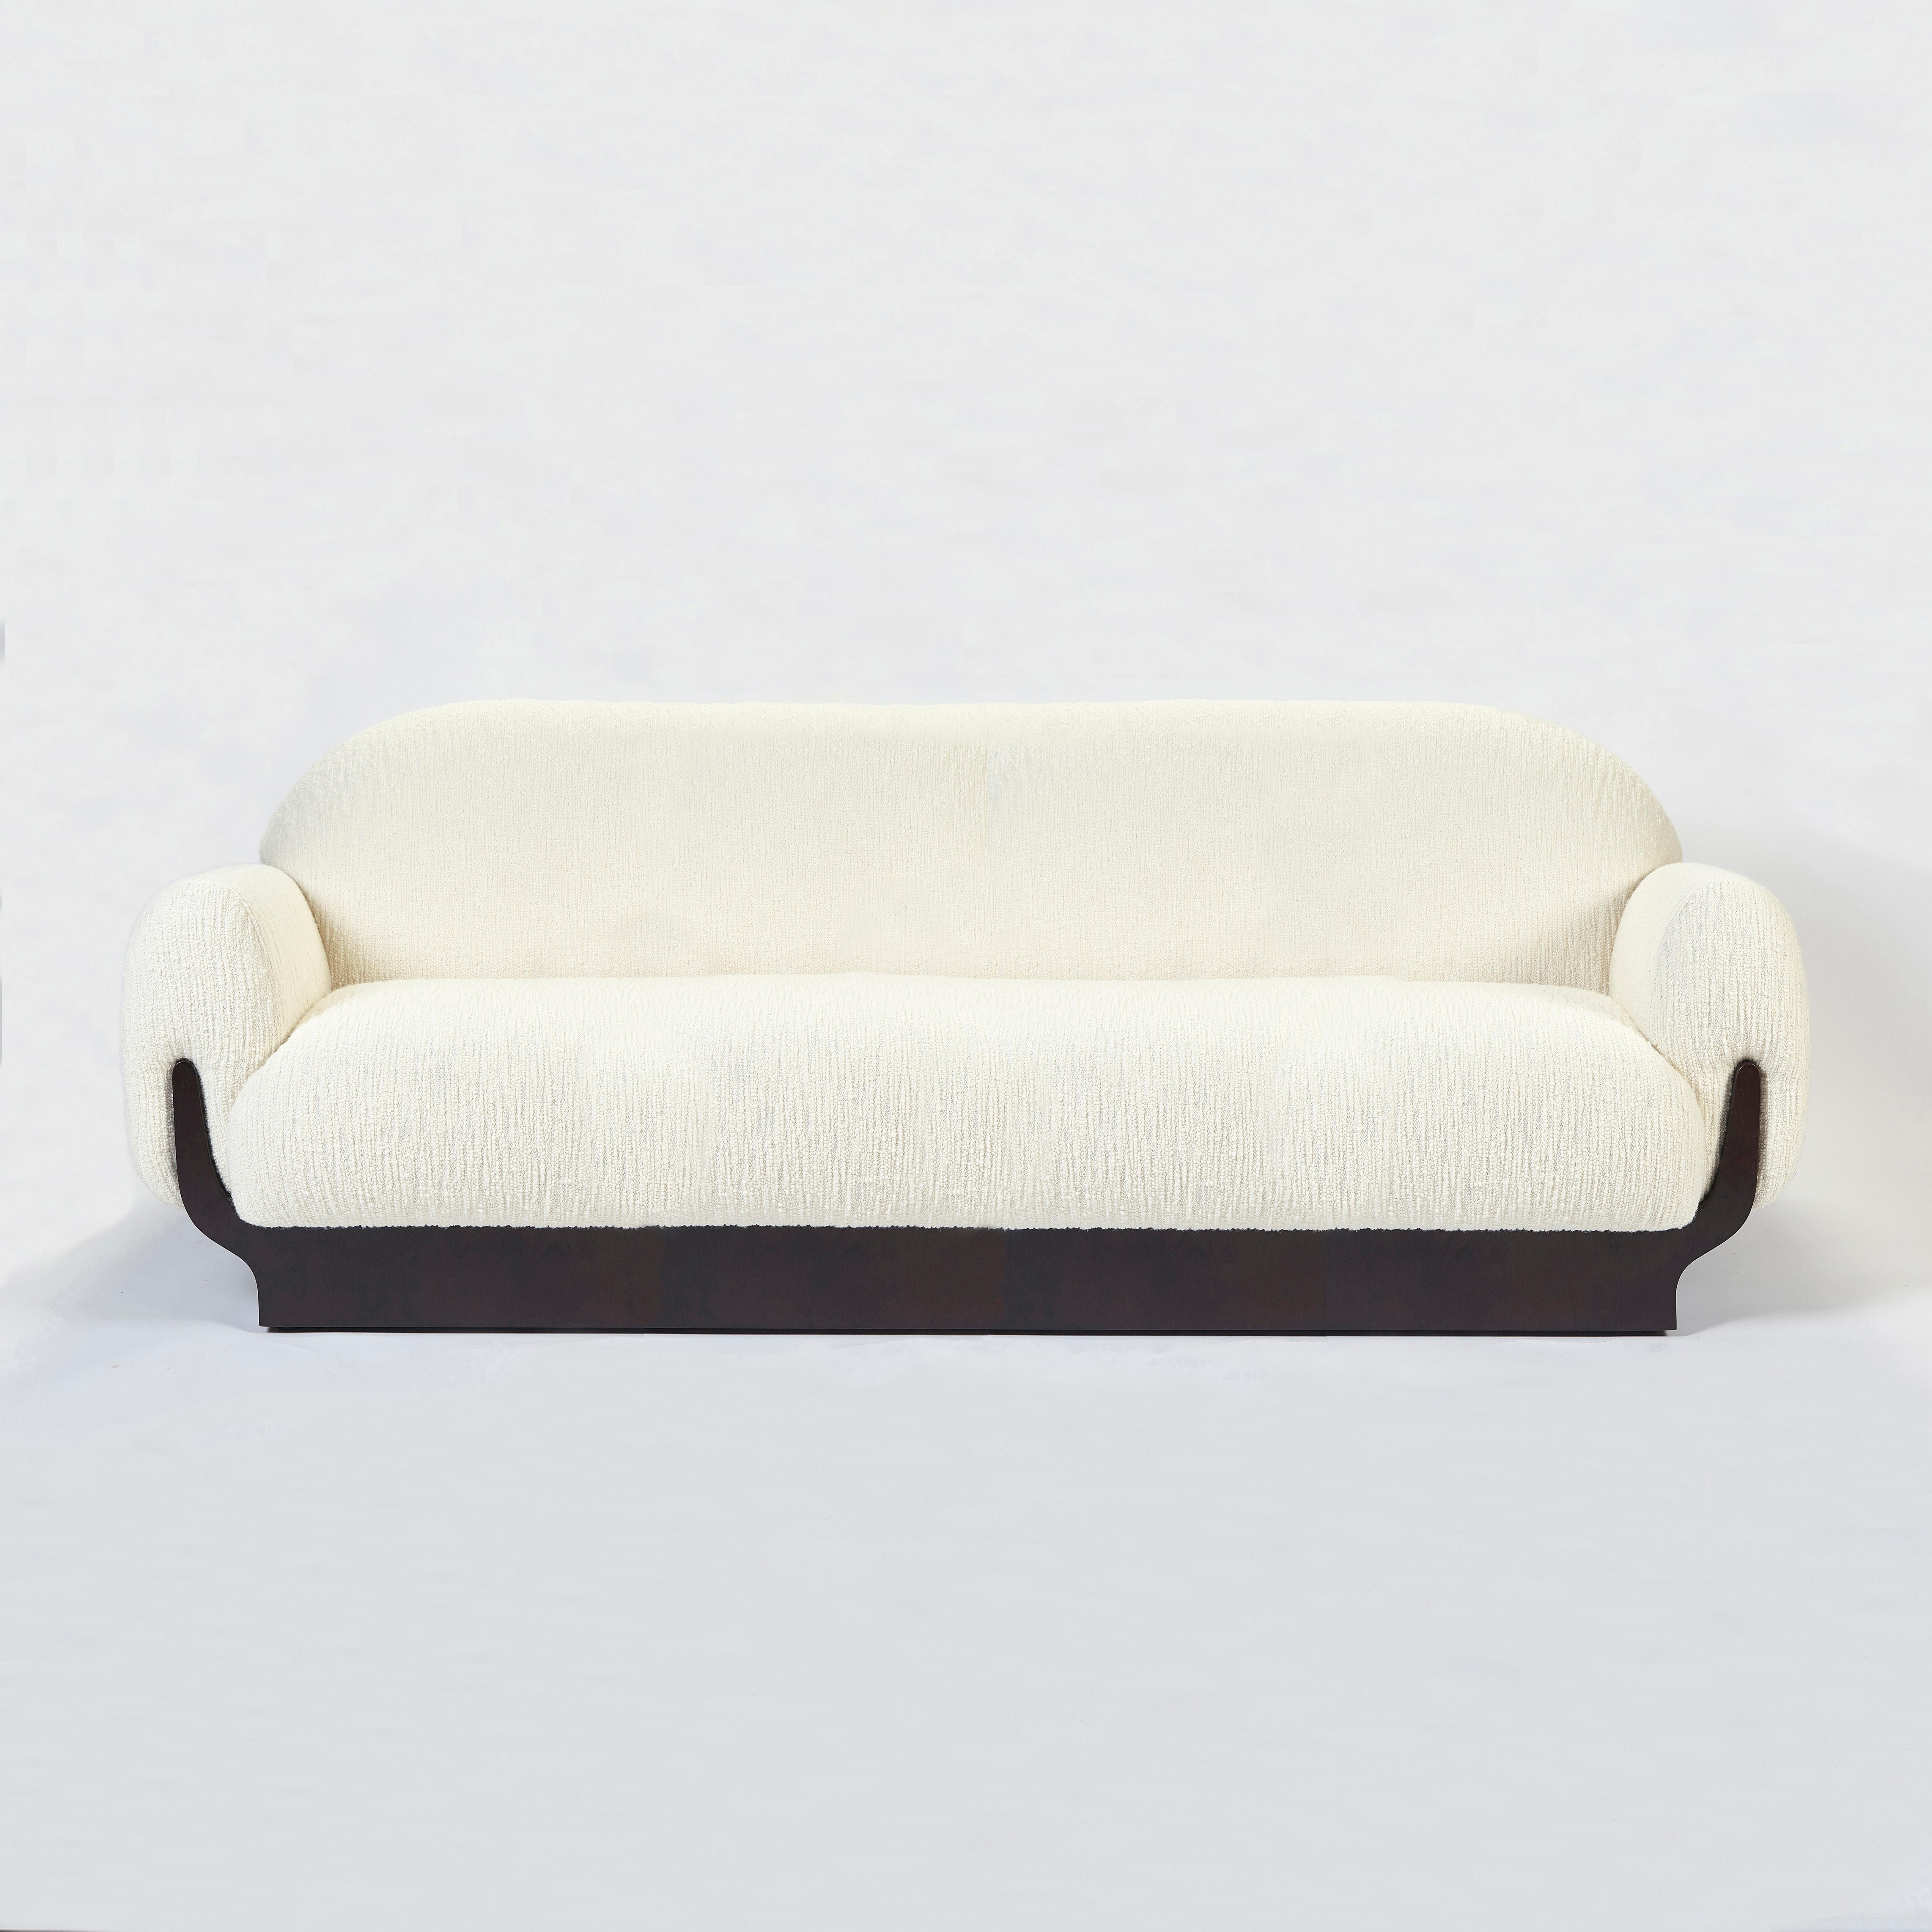 Copacabana Sofa by Duistt
Dimensions: W 250 x D 98 x H 84 cm
Materials: Zinc - Clayton Ivory Fabric, Darkened Oak

With a bohemian look, the Copacabana sofa is the perfect blend of unique style and cosy comfort. Inspired by the sidewalks of Rio de